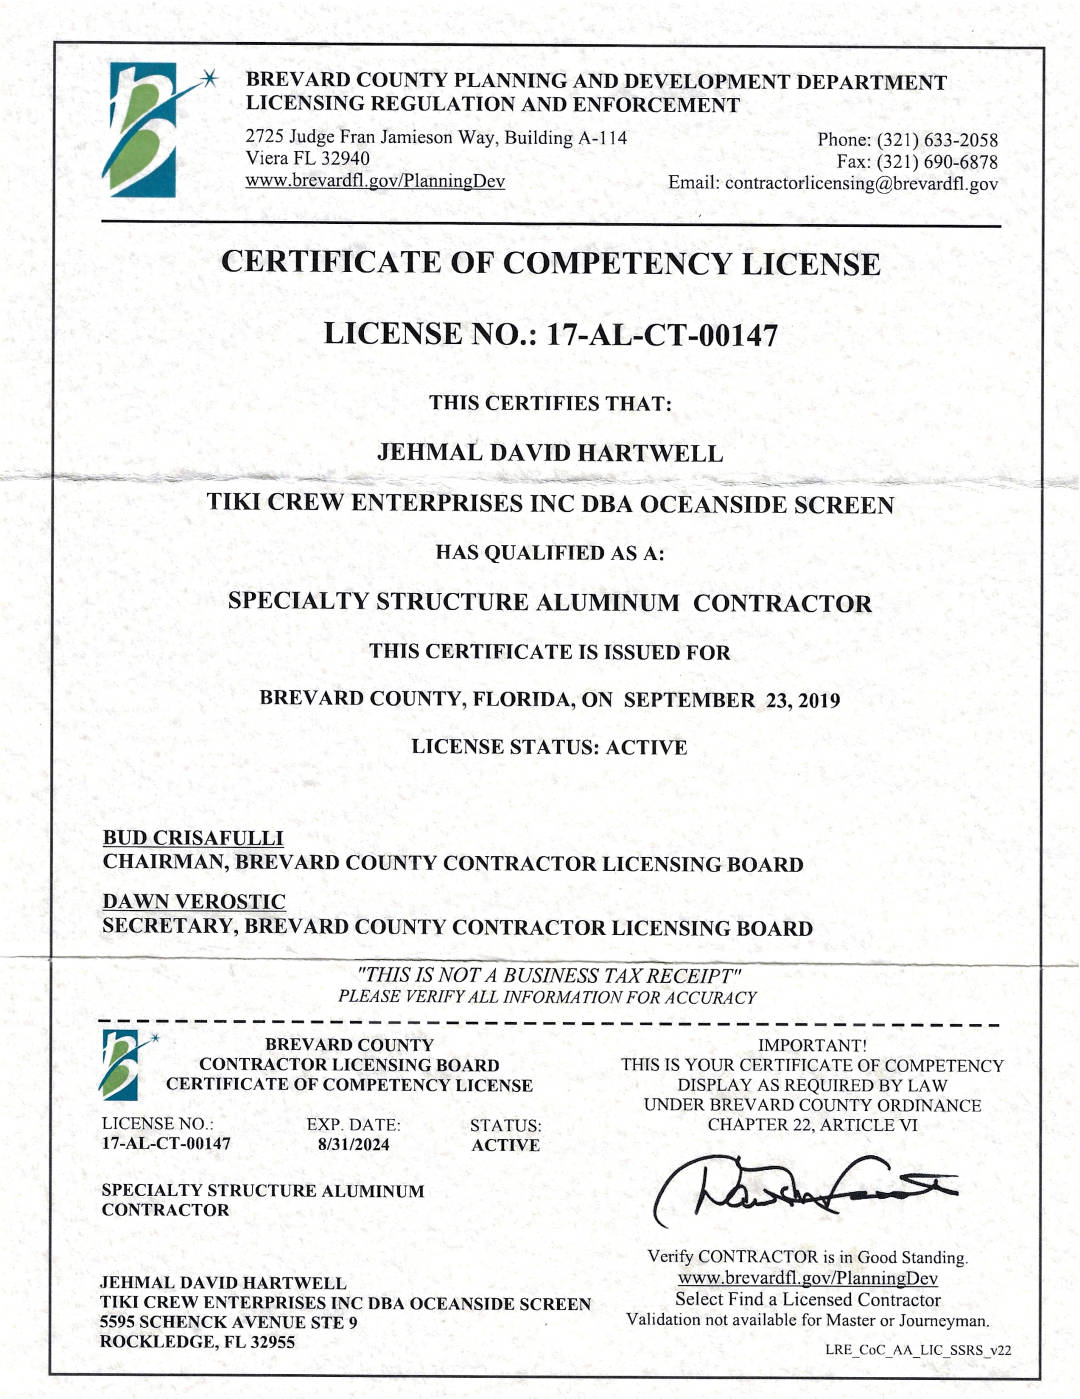 Certificate of Competency License